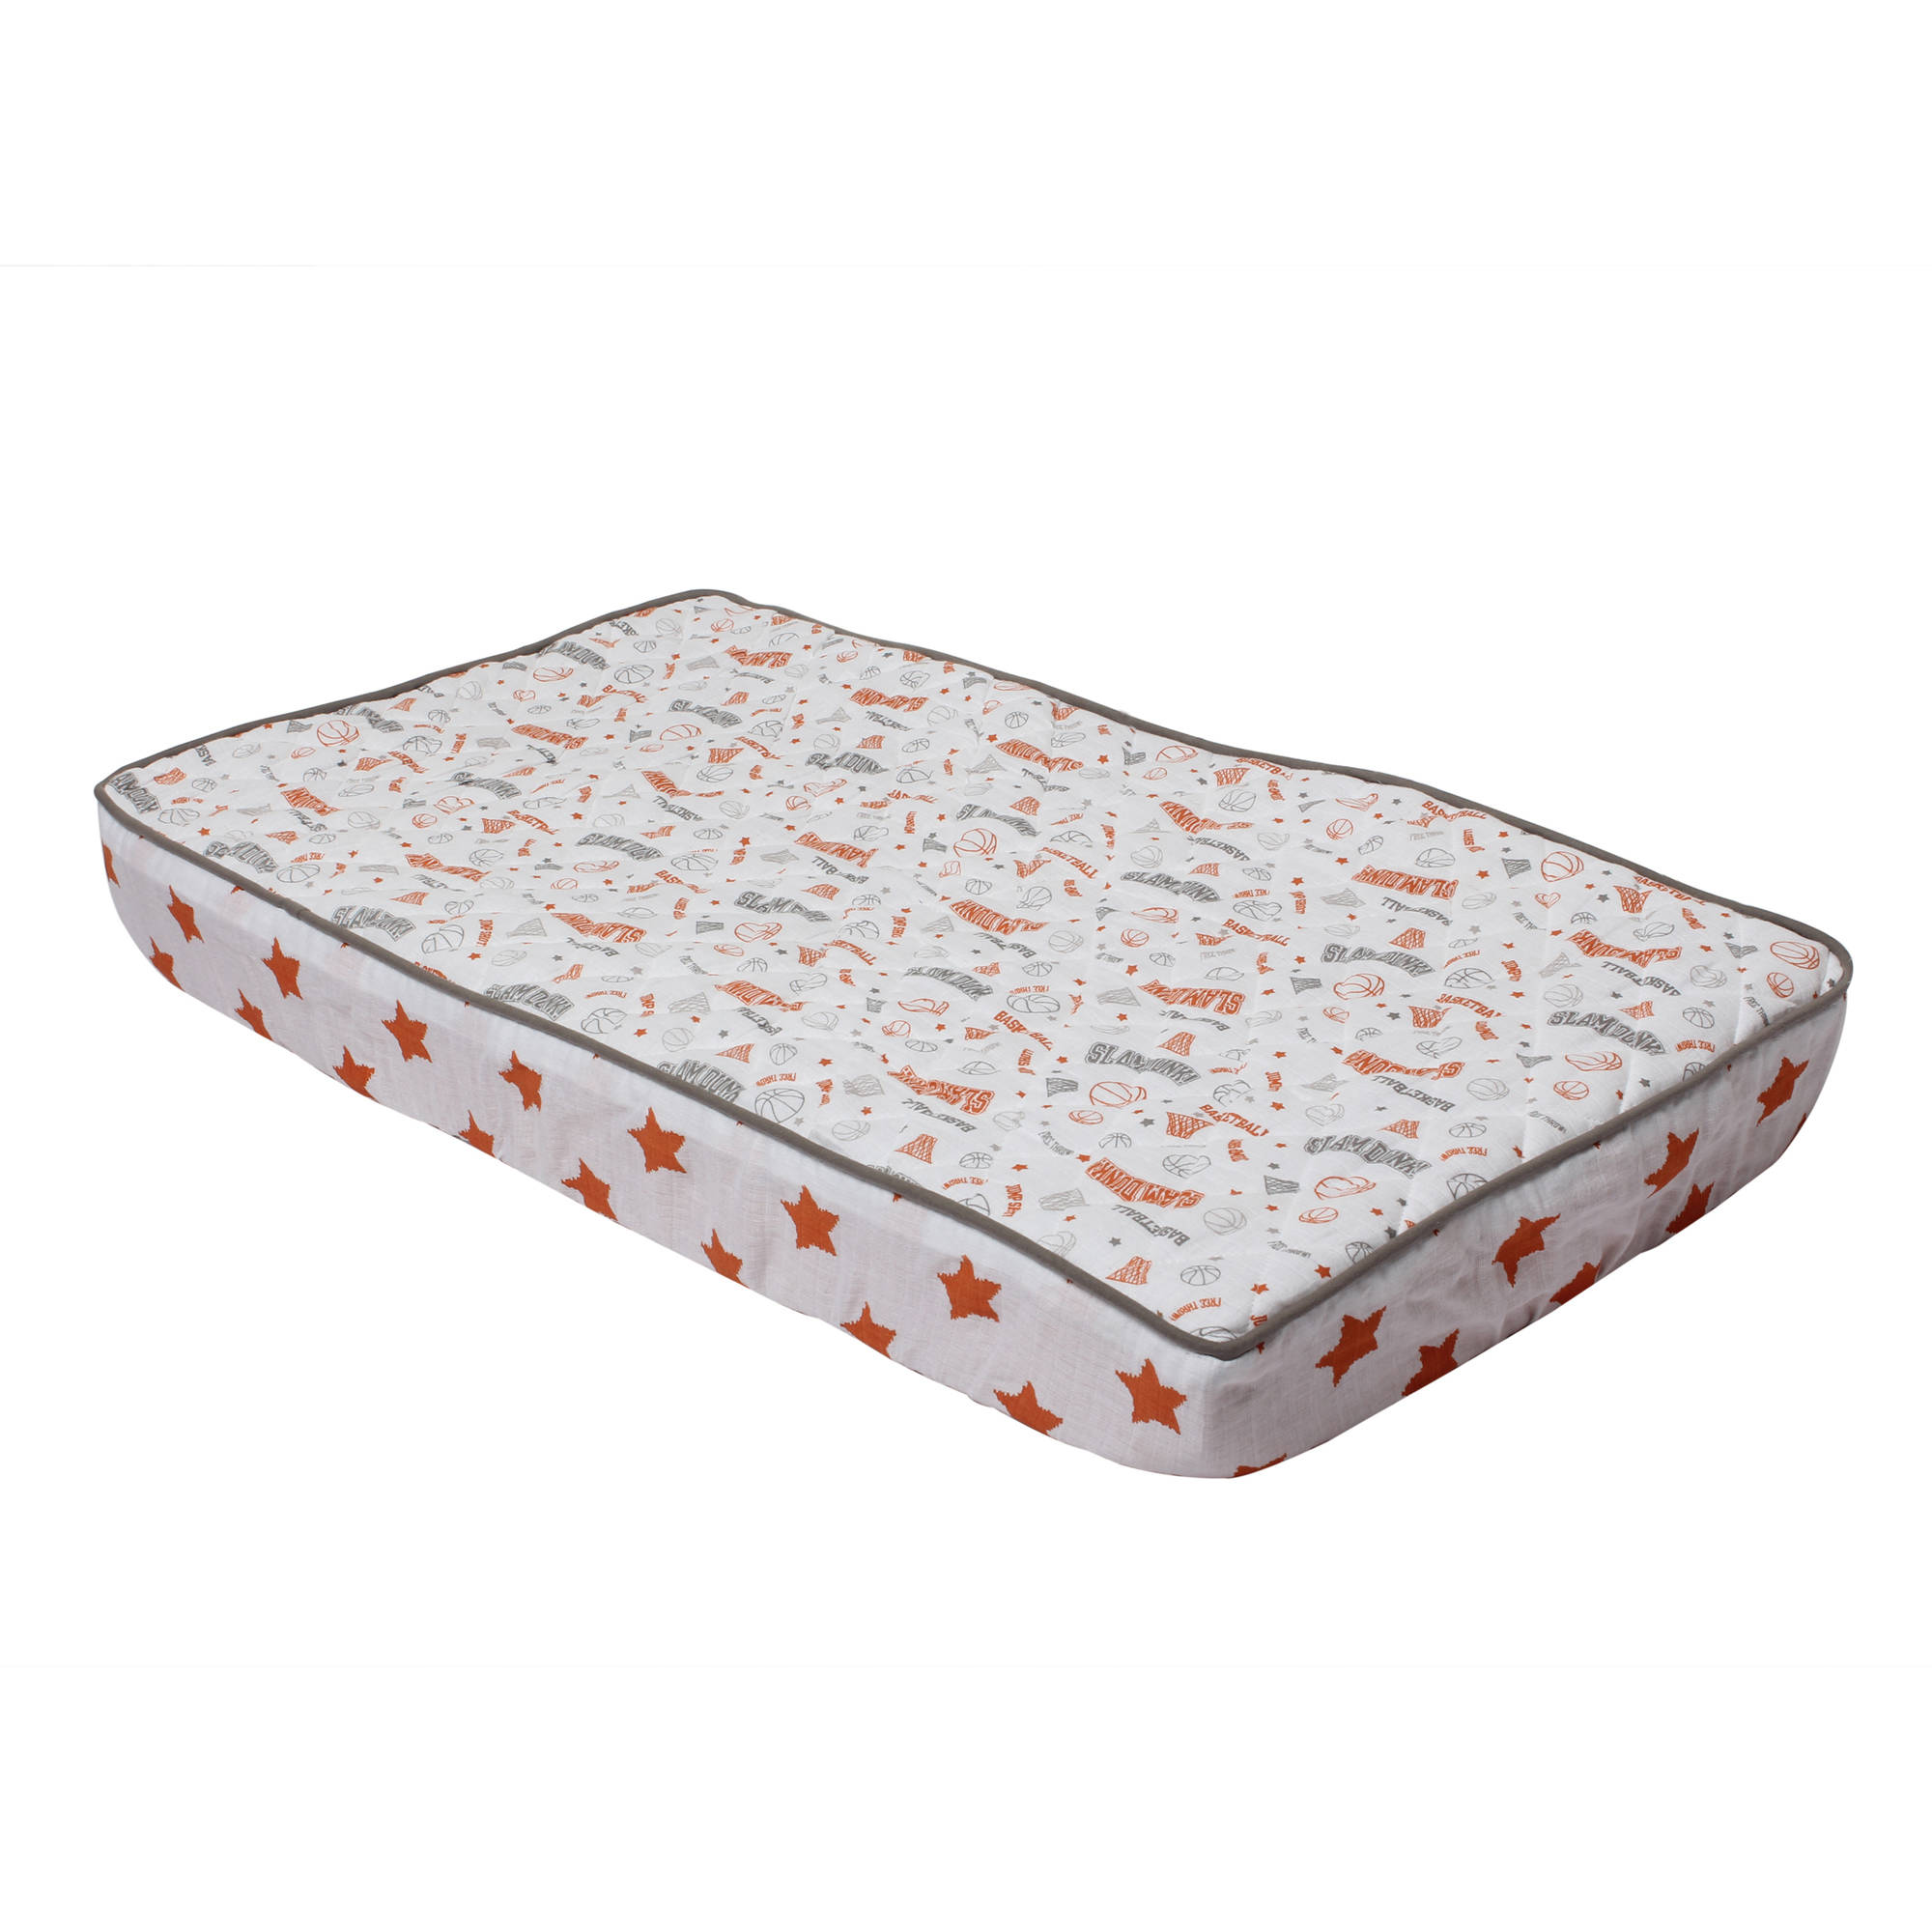 Bacati - Basketball Orange/Gray Boys Muslin Quilted Changing Pad Cover - image 1 of 2